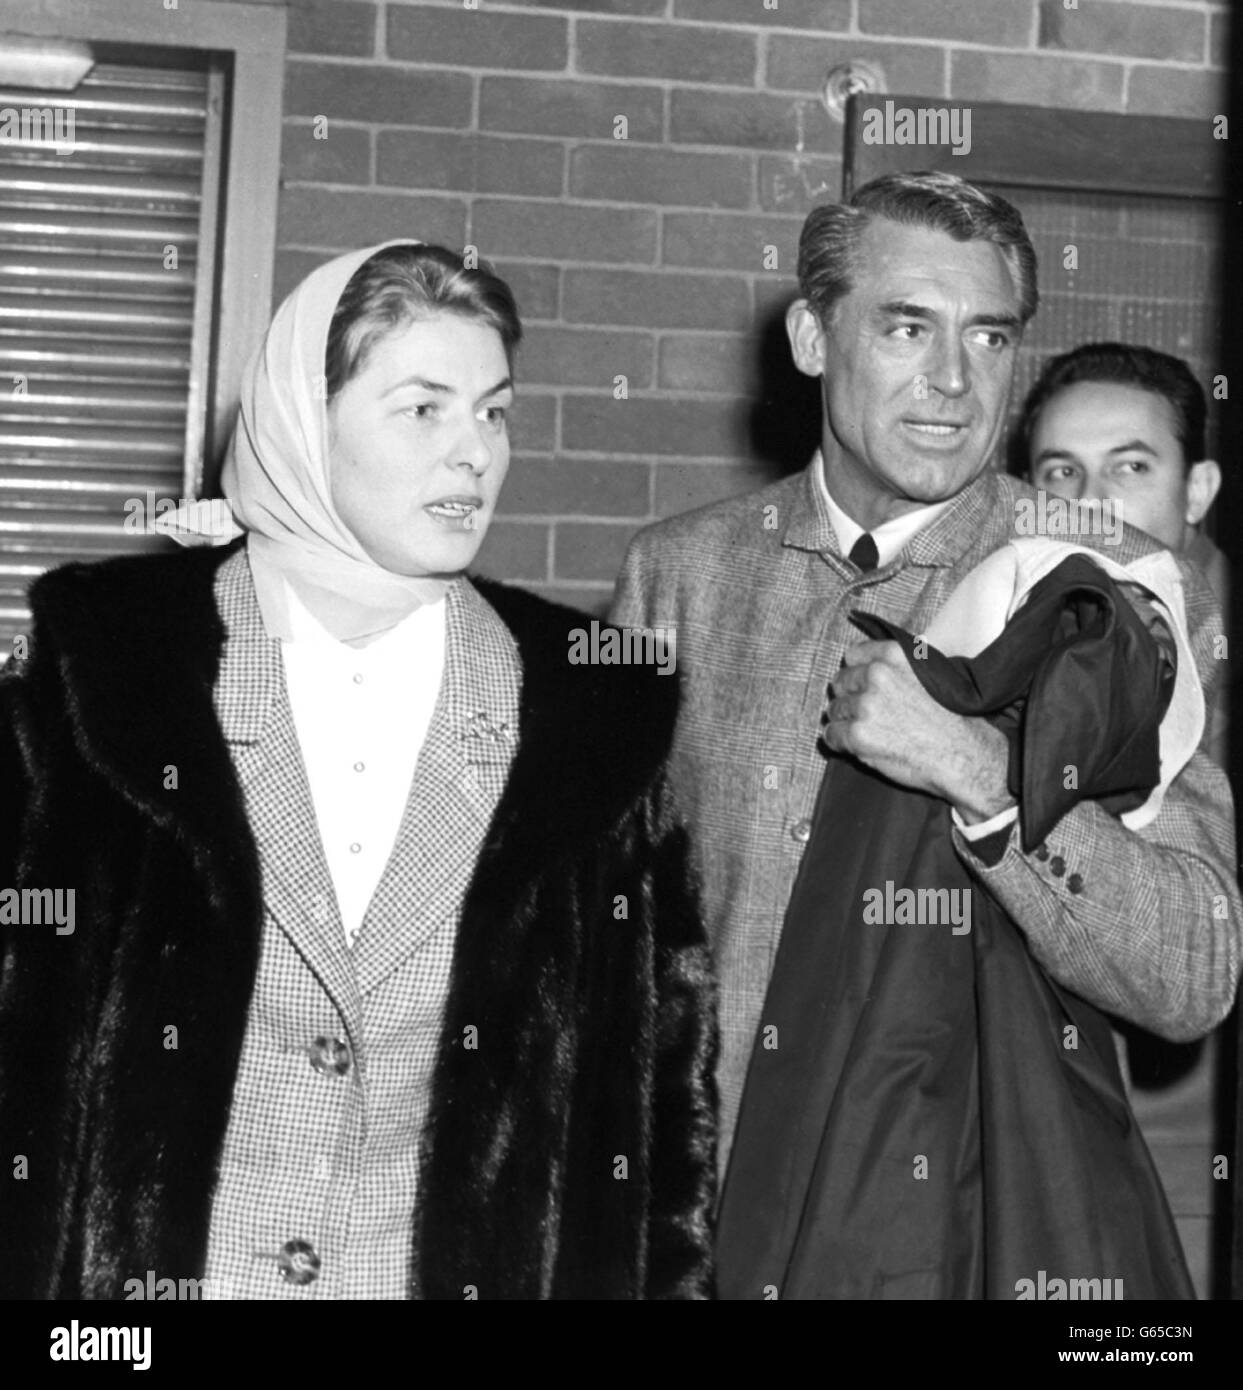 Ingrid Bergman and Cary Grant - London Airport. Actress Ingrid Bergman and actor Cary Grant who met her at London Airport after she arrived from Rome. Stock Photo